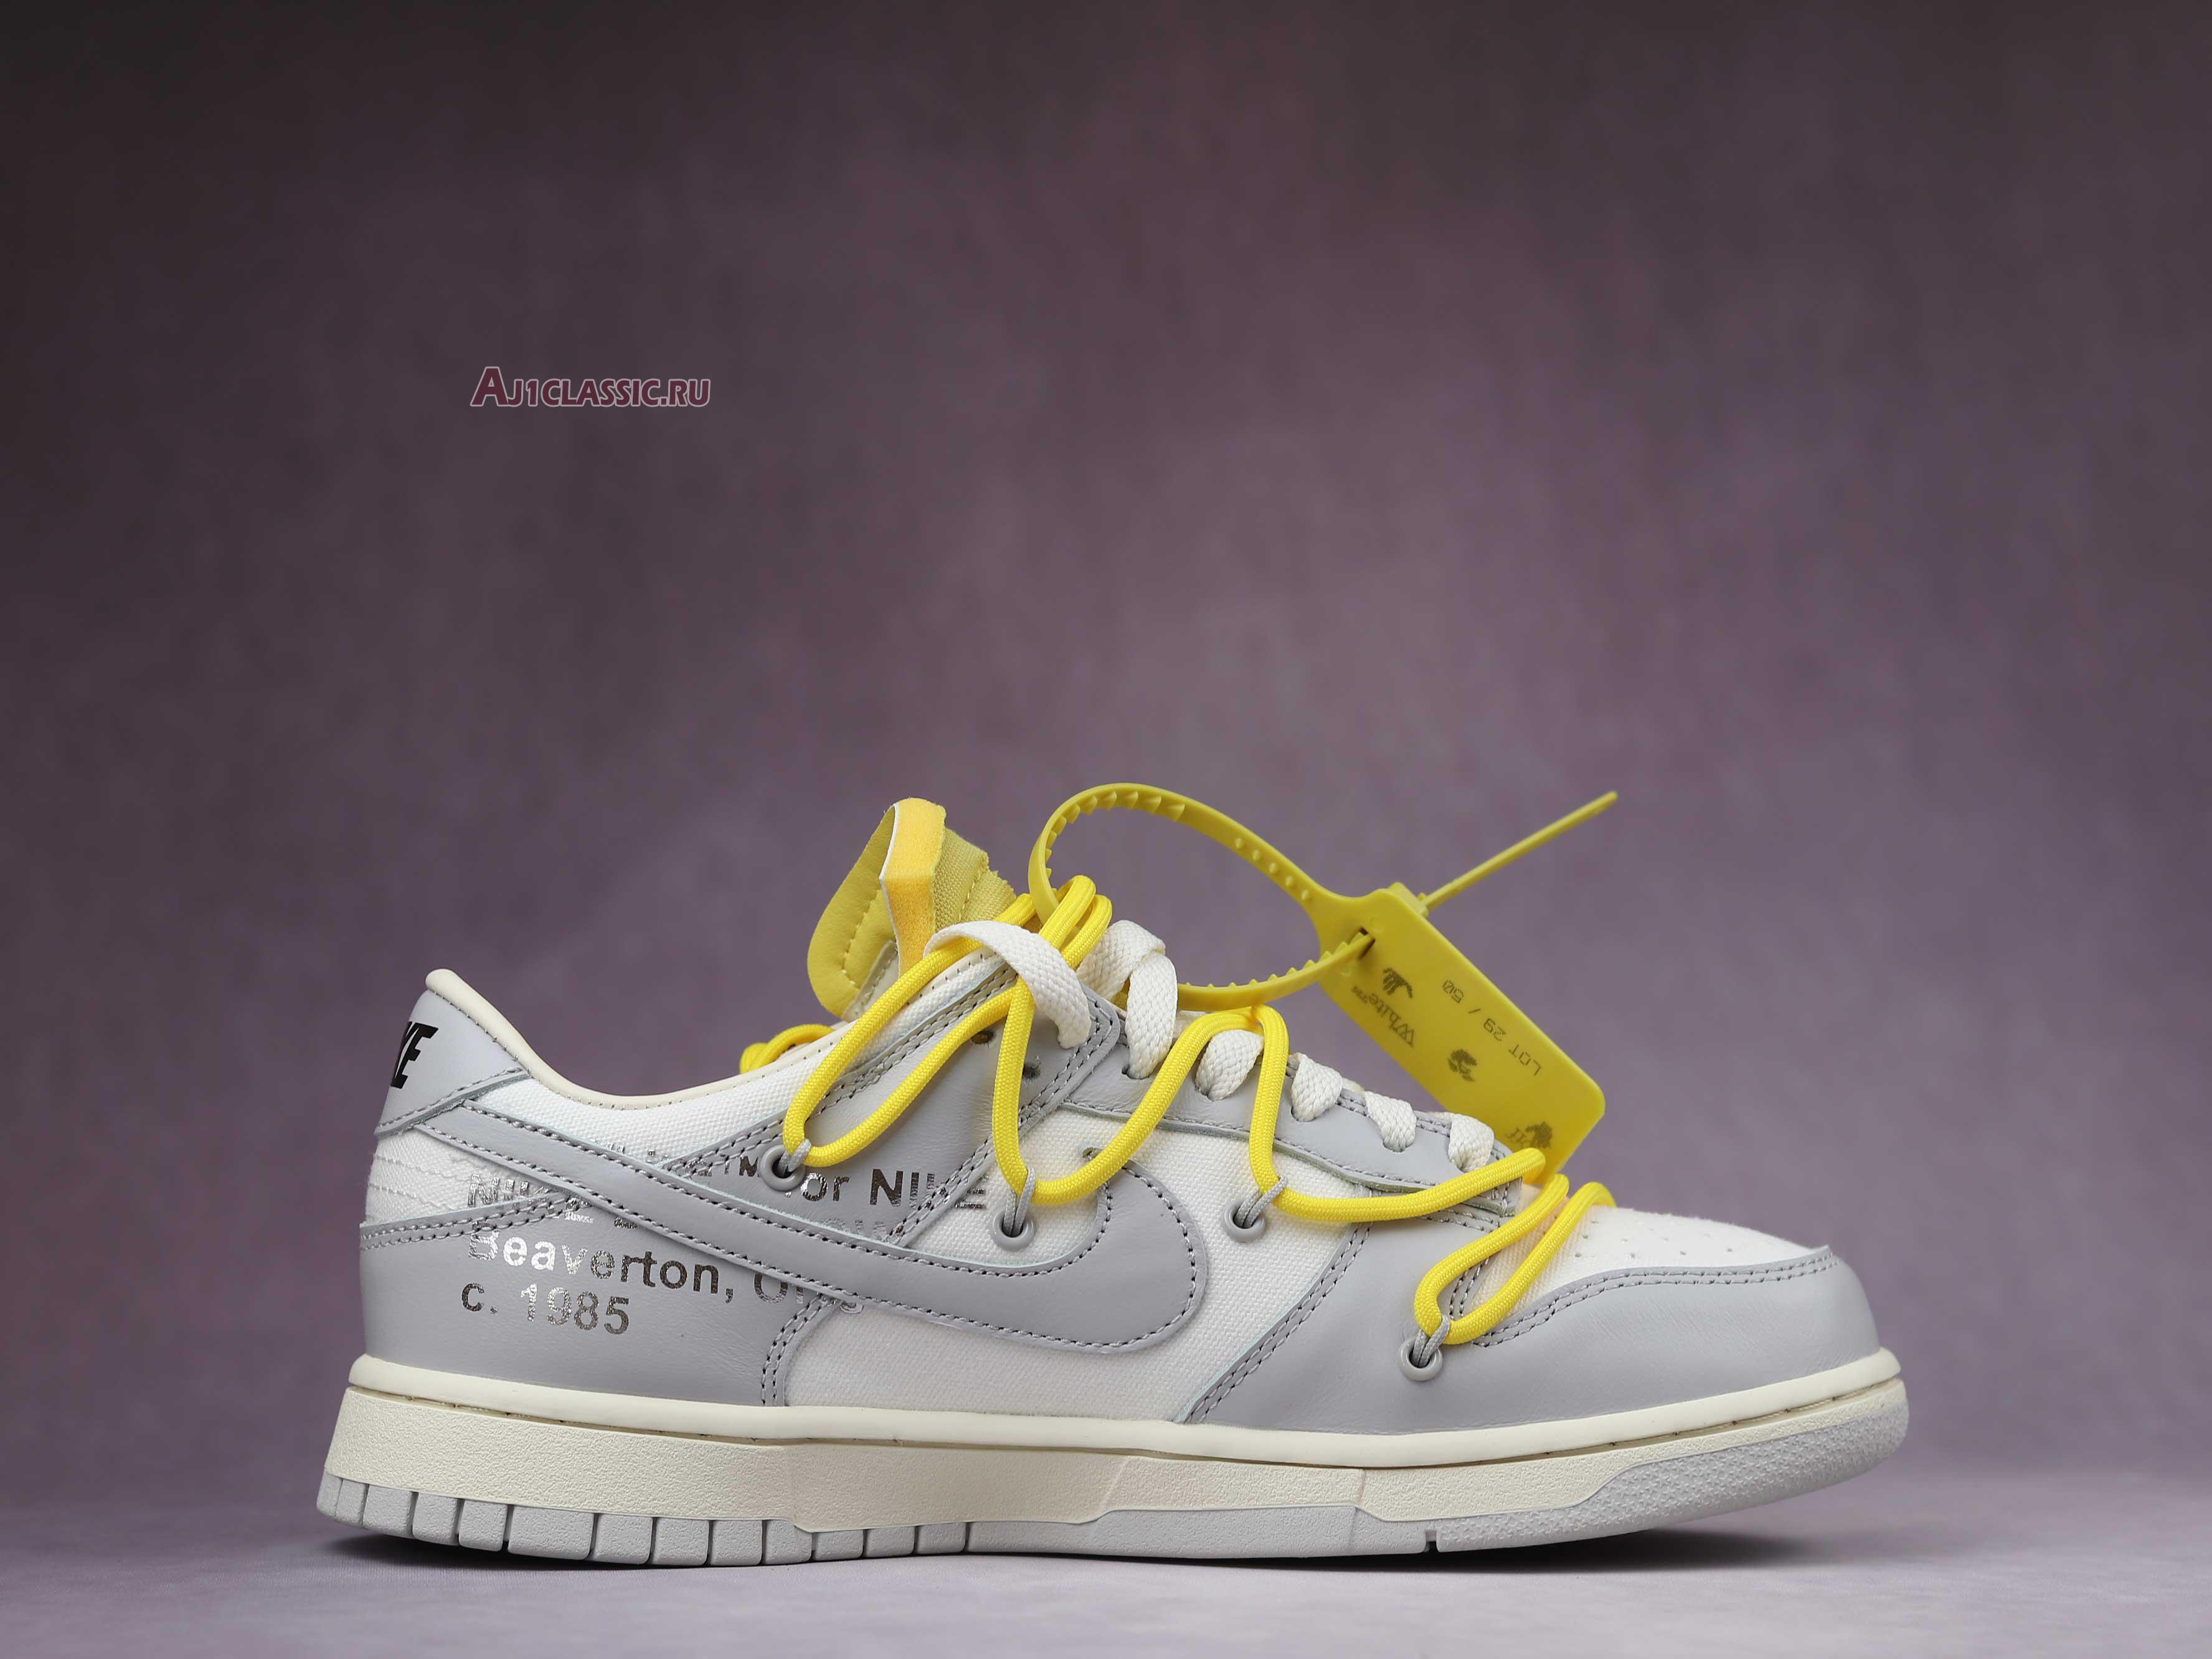 Off-White x Nike Dunk Low "Lot 29 of 50" DM1602-103